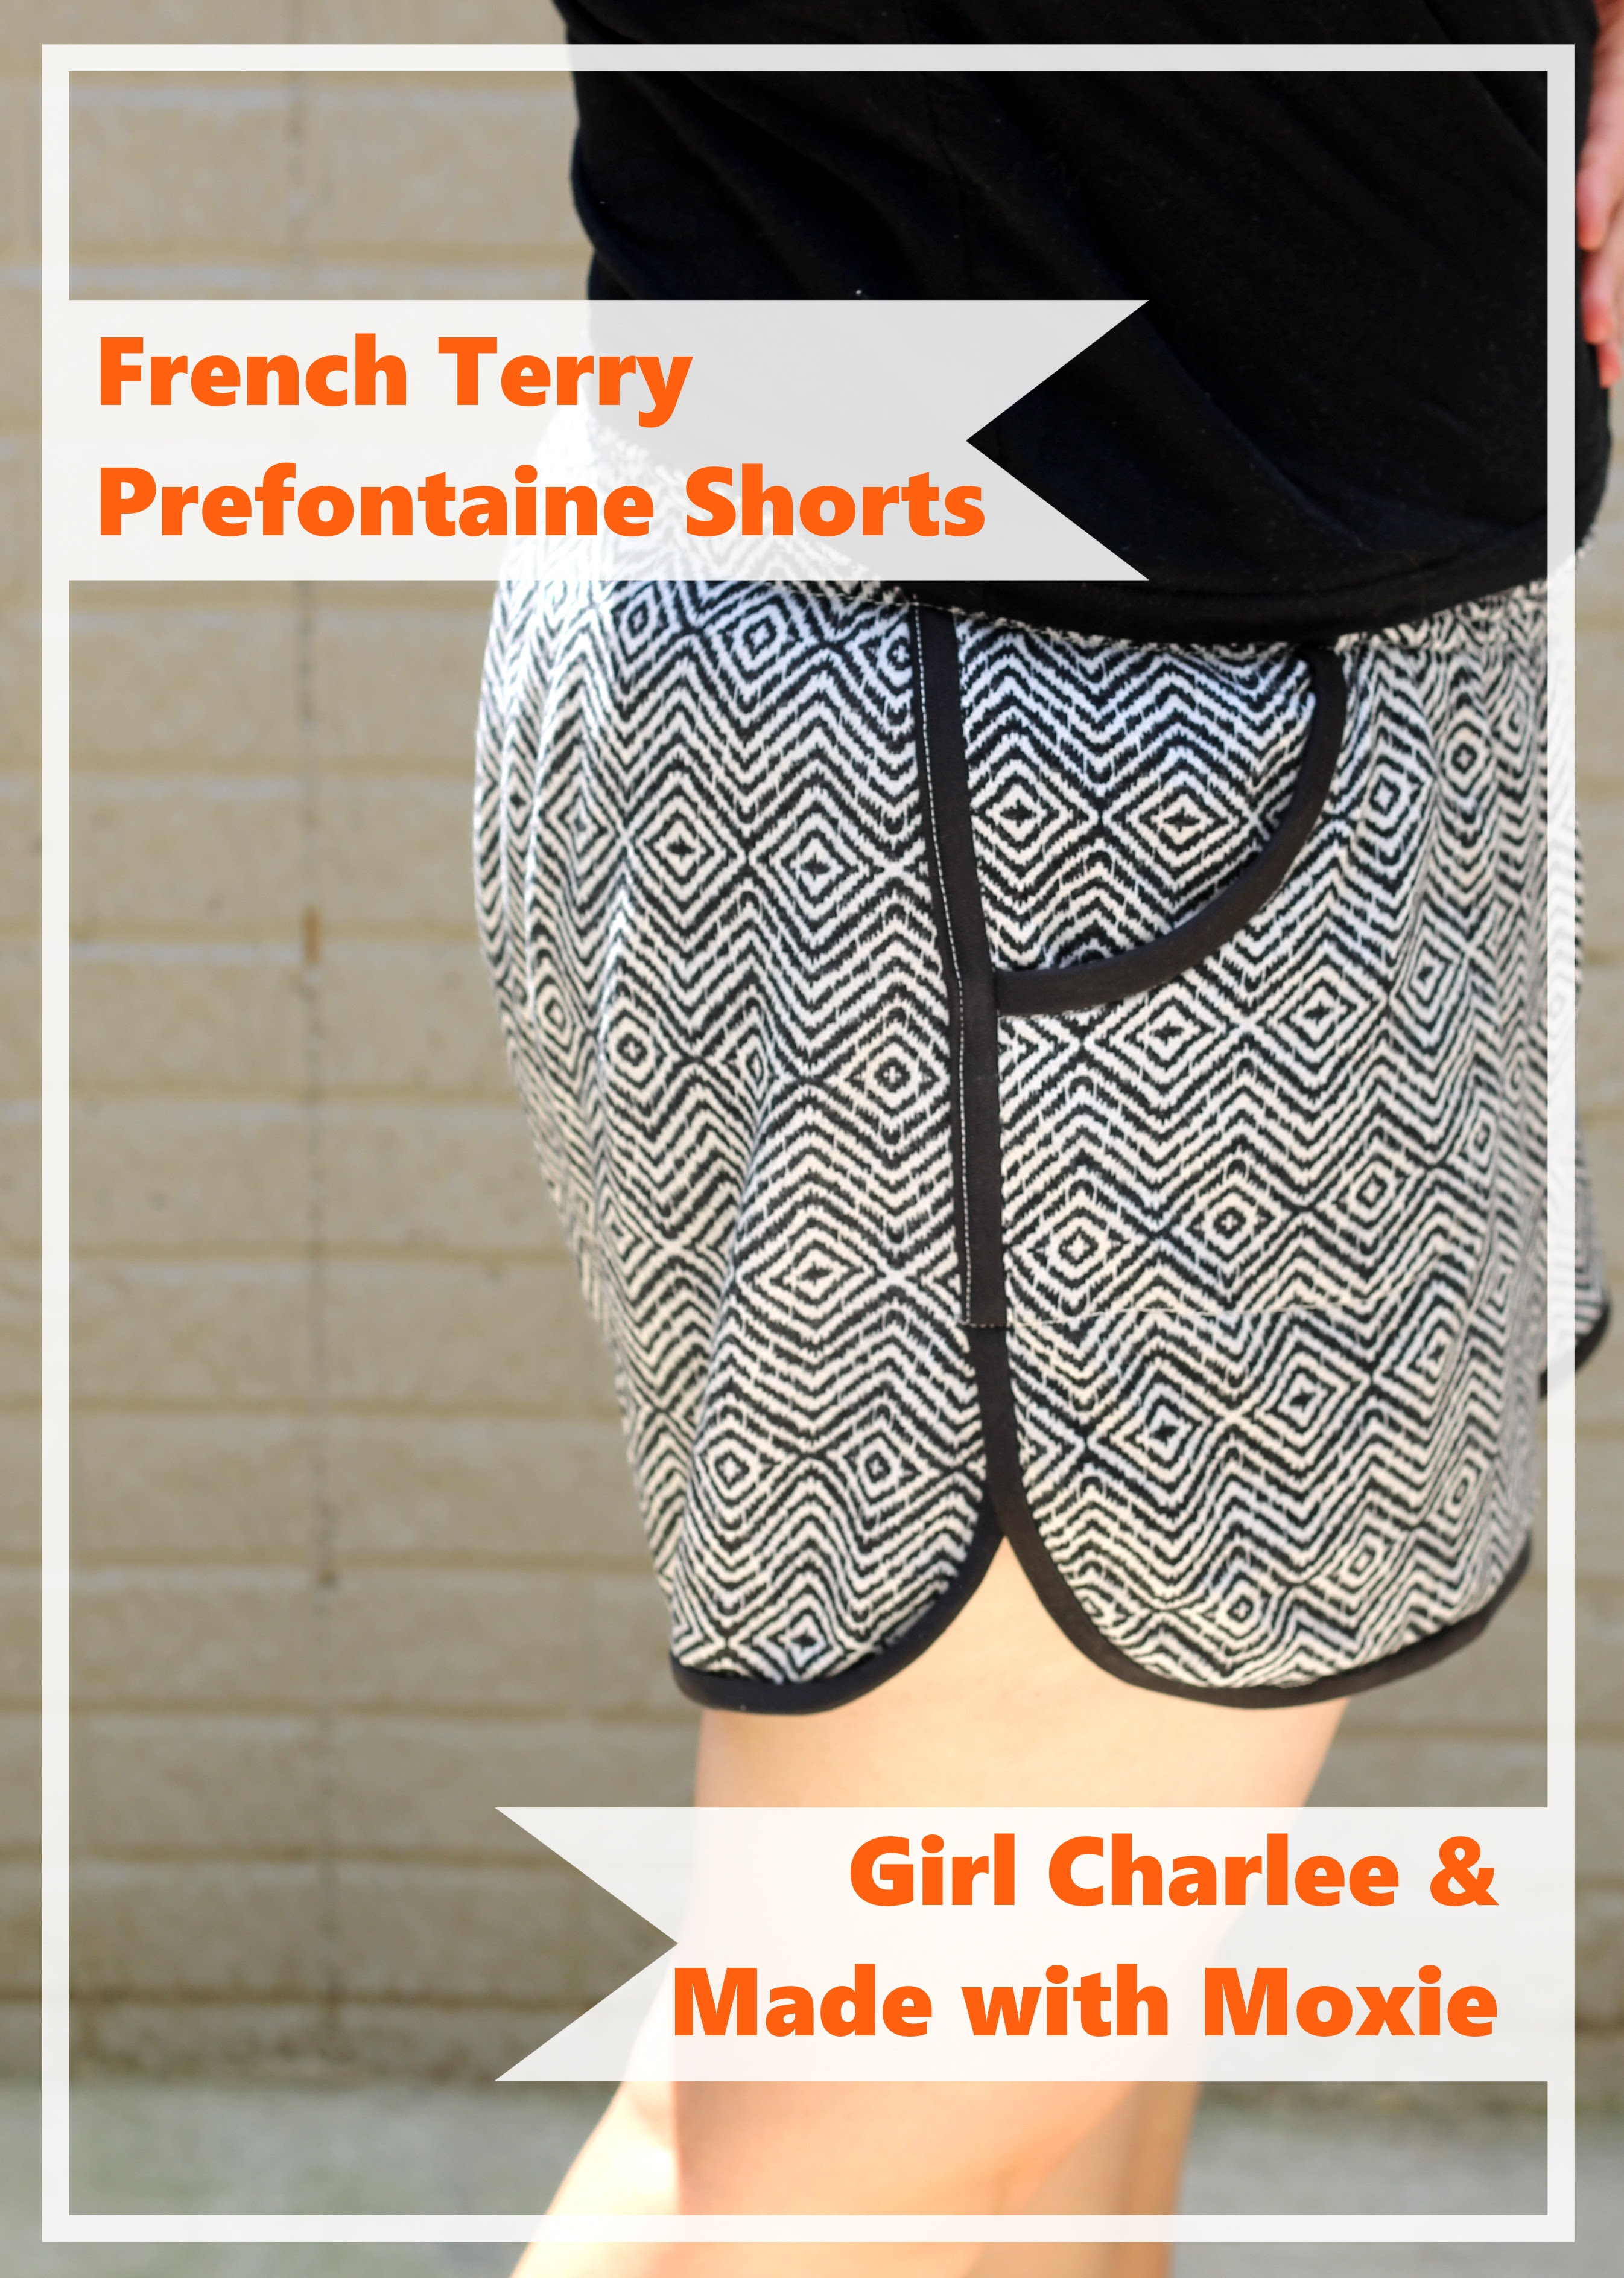 Ethnic french terry fabric from Girl Charlee & Prefontaine Shorts for Women pattern by Made with Moxie